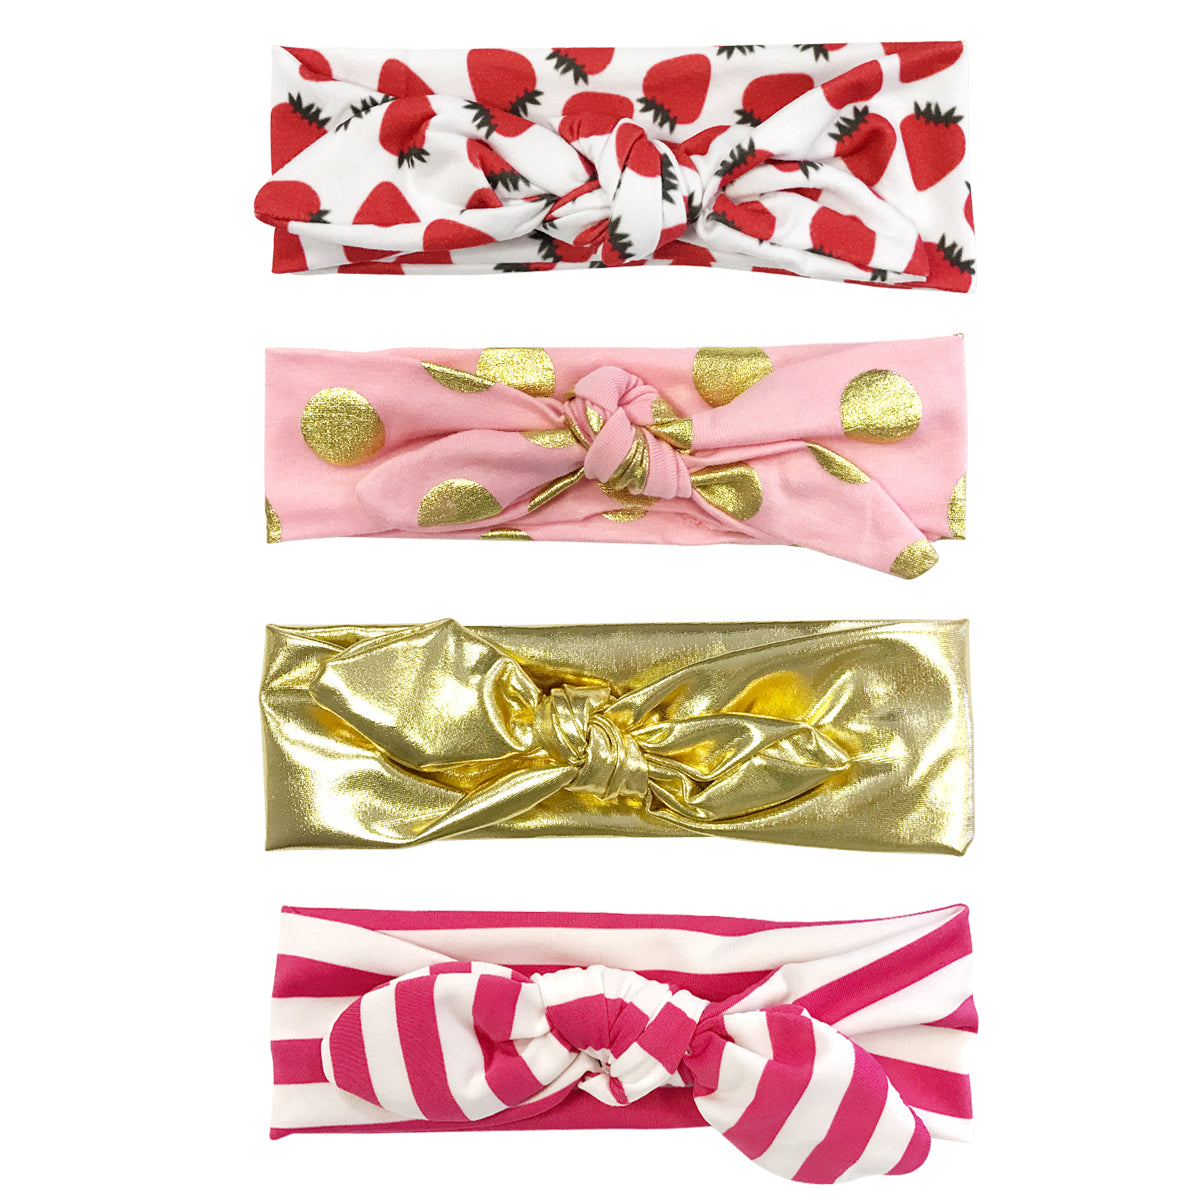 Wrapables Girls Boho Knotted Headband Headwrap (Set of 4)